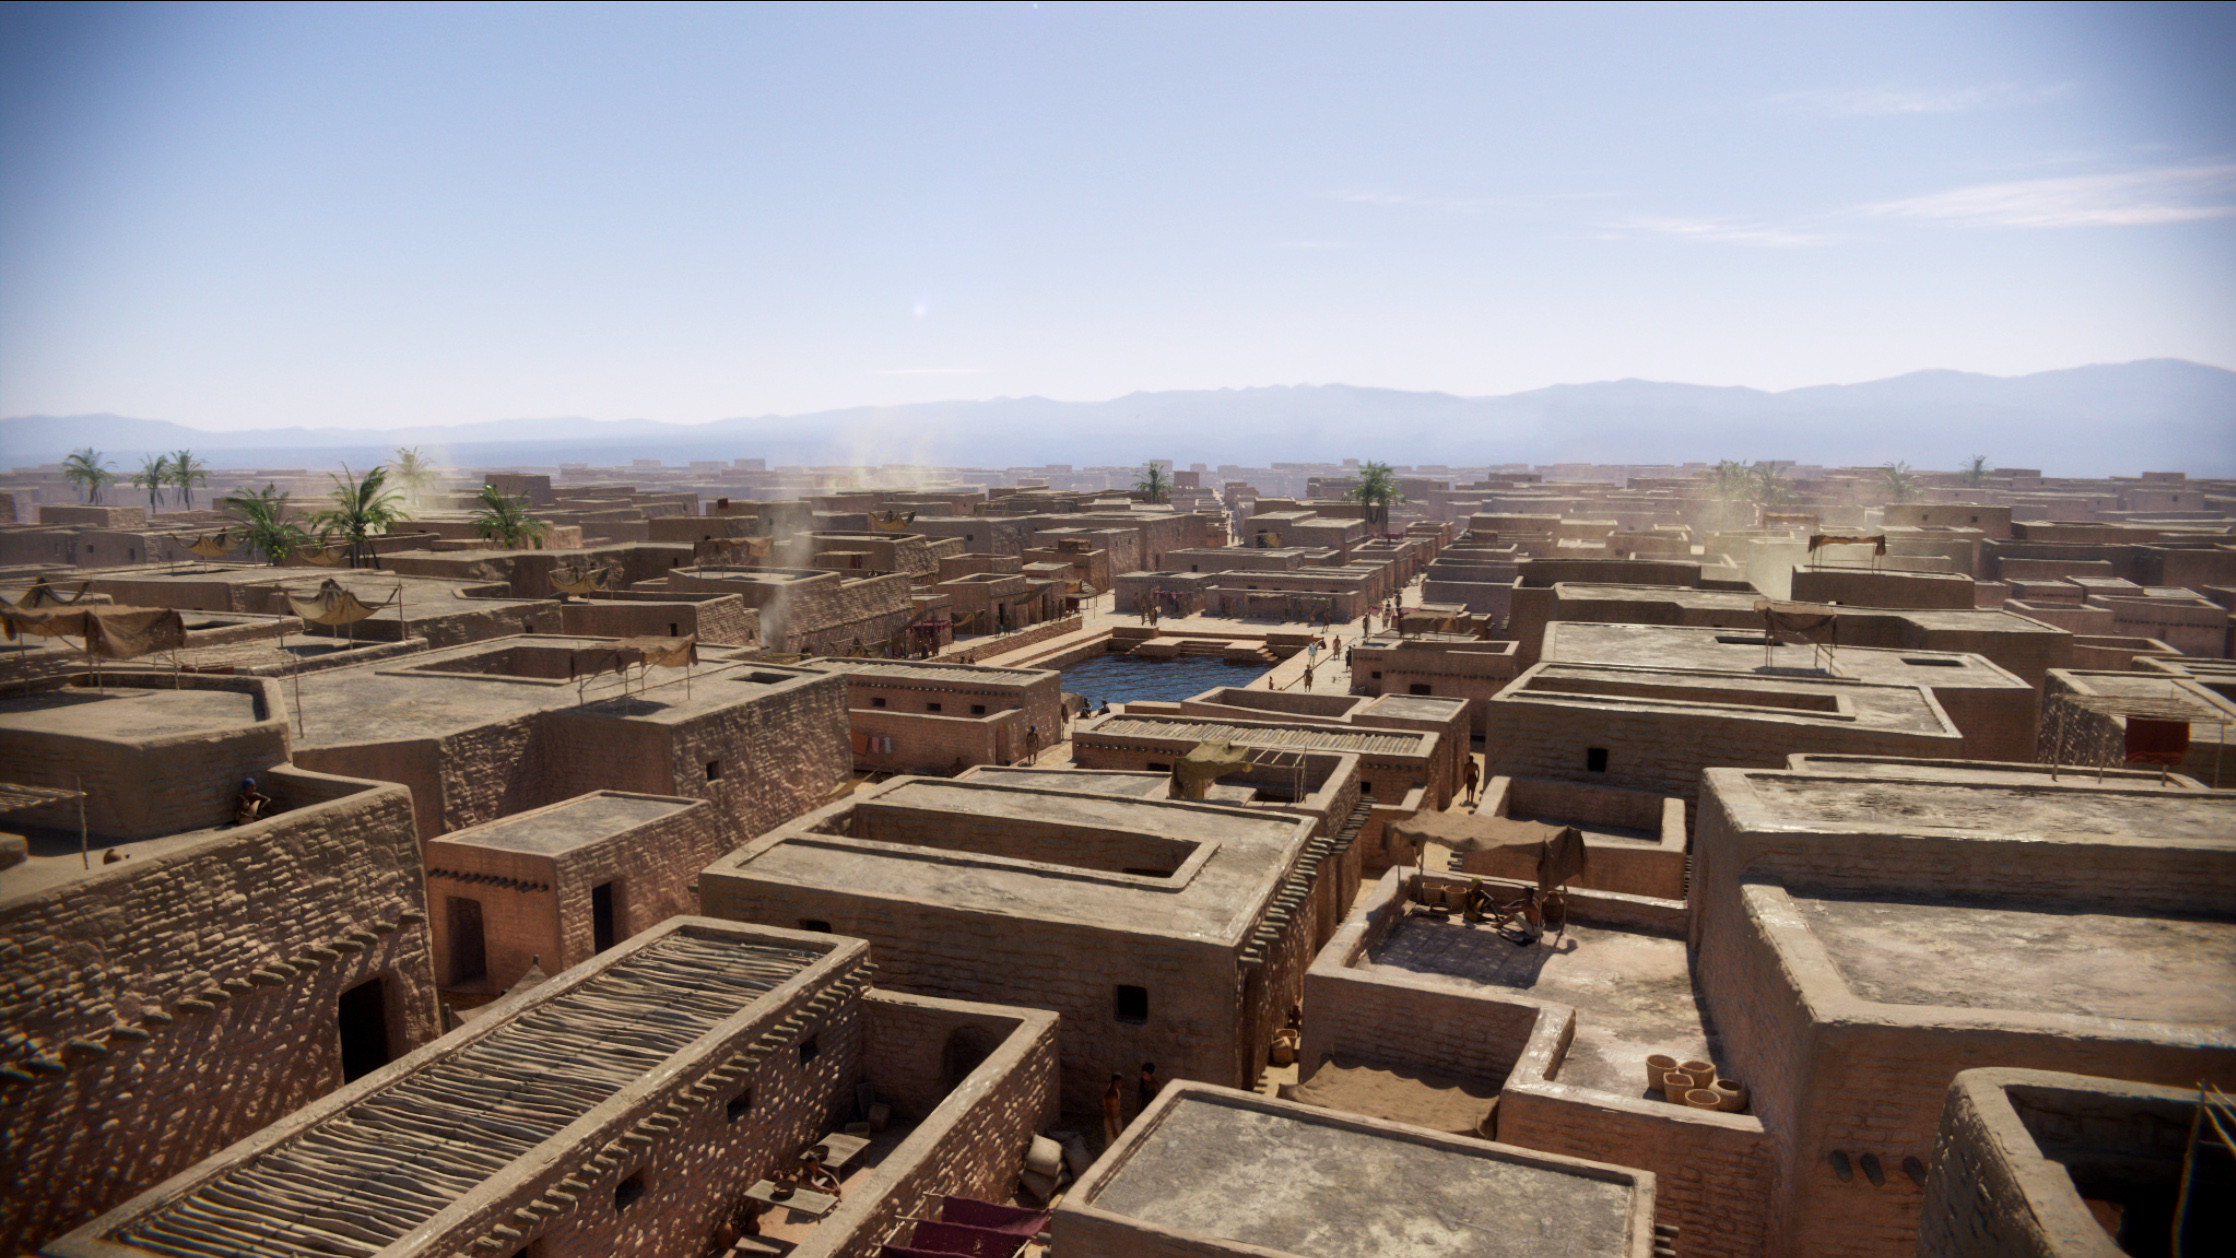 Mohenjo-daro final comp frame. I was responsible for layout and concept of the city